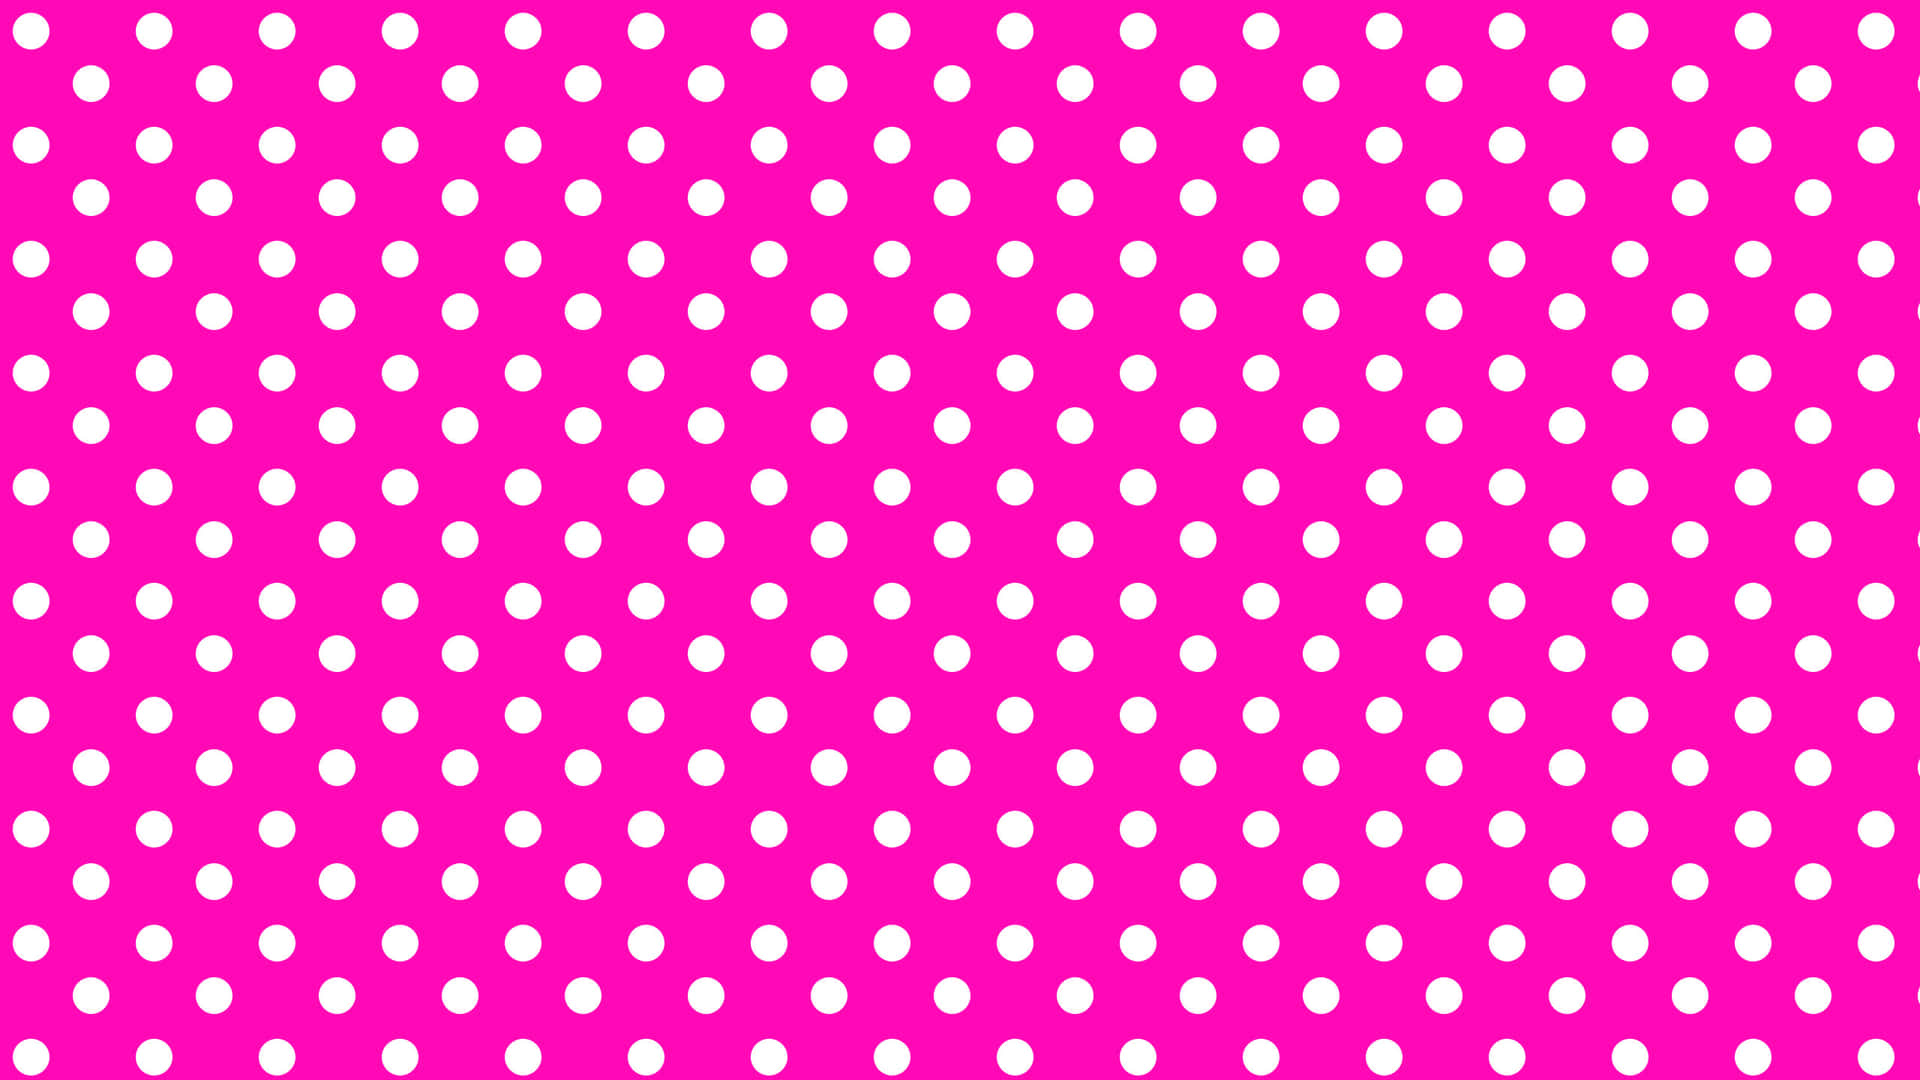 2. Cute Pink and White Polka Dot Nails - wide 3